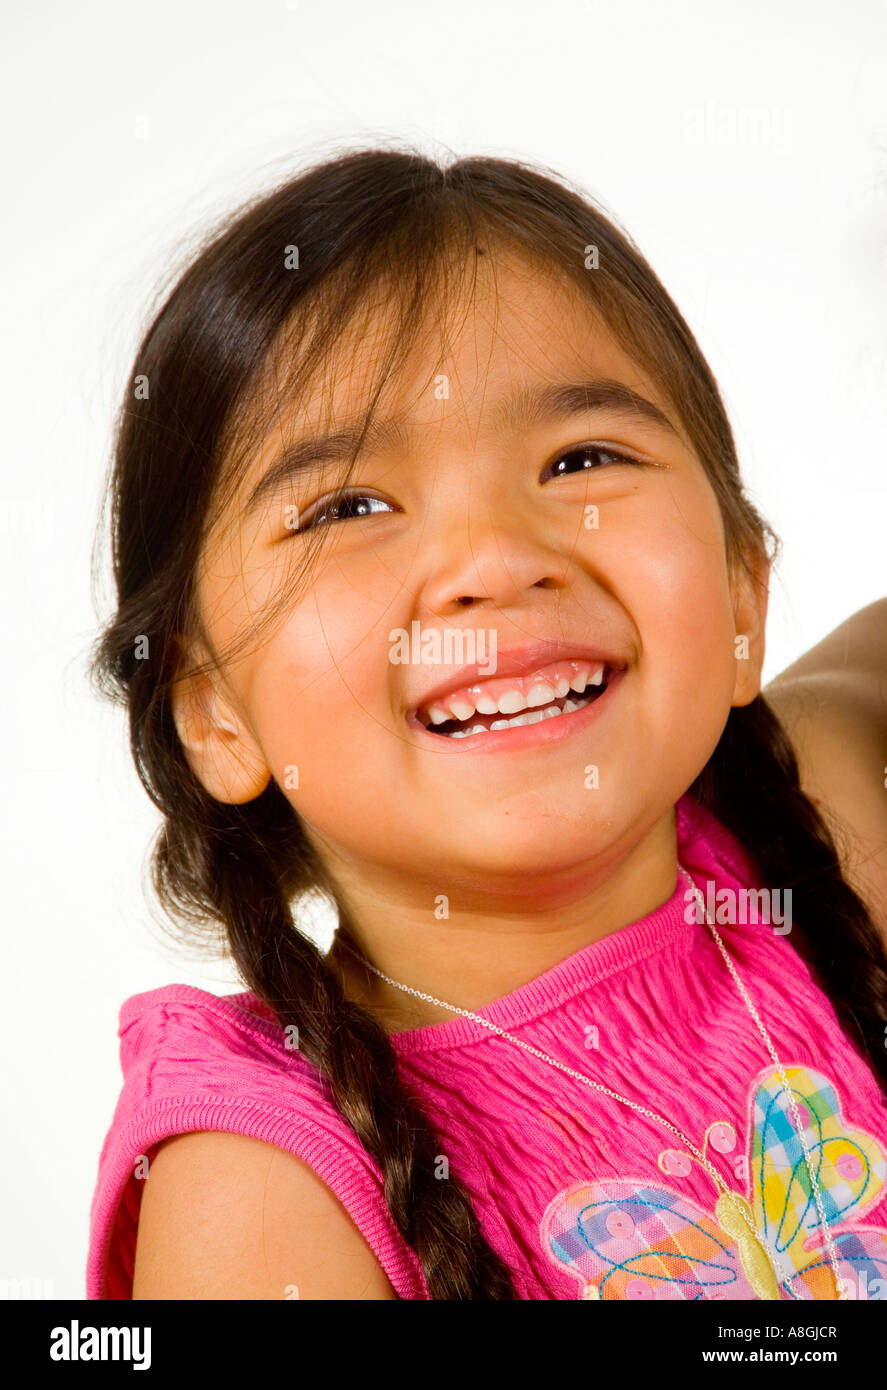 A happy 4 year old Californian Chinese American girl Stock Photo